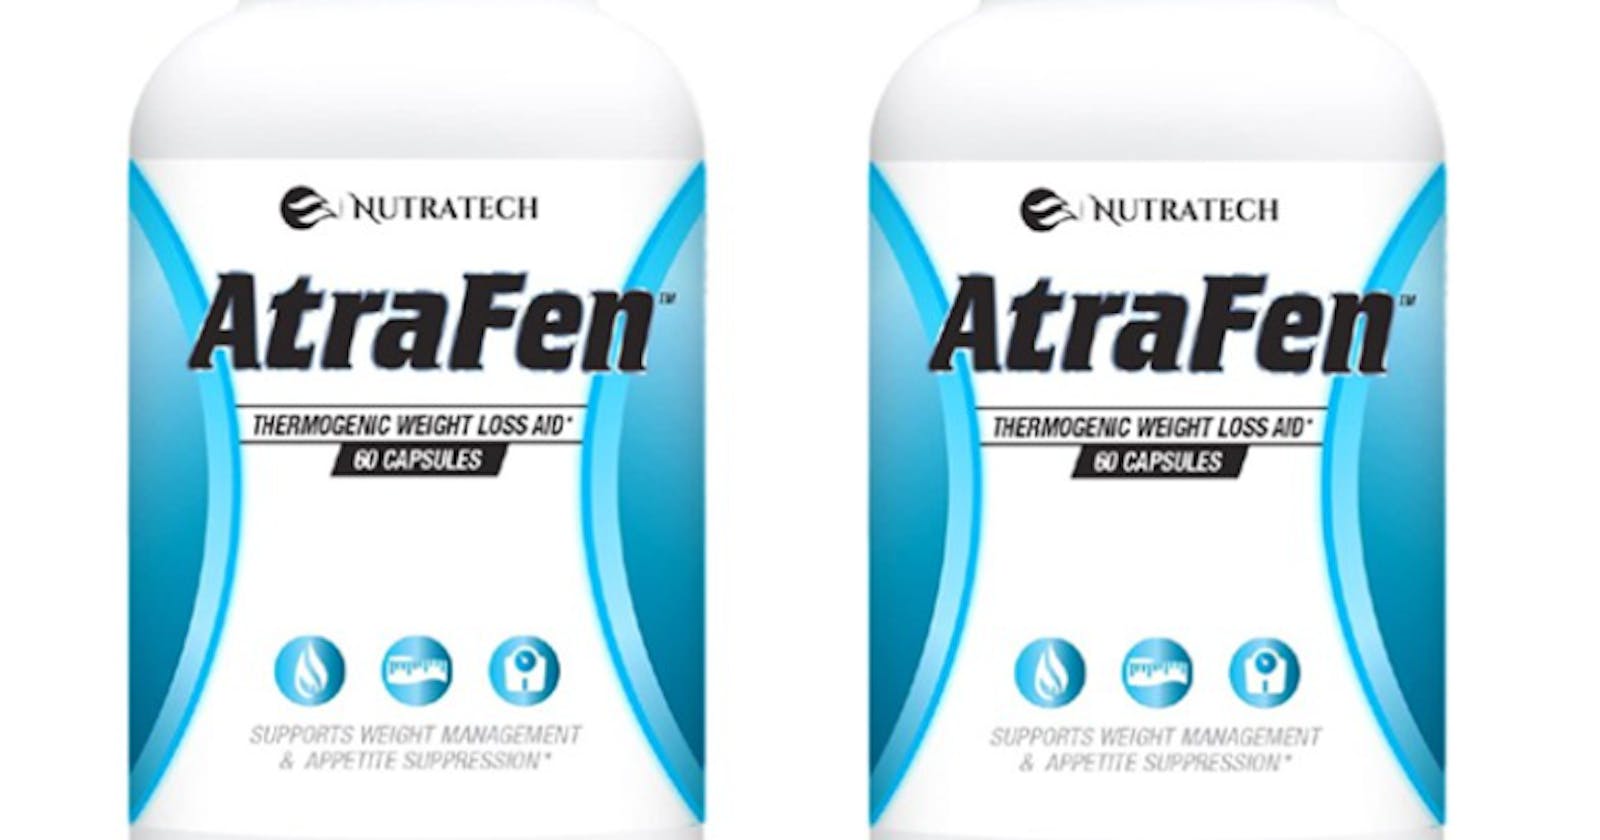 Lose Weight Faster and Easier with Atrafen